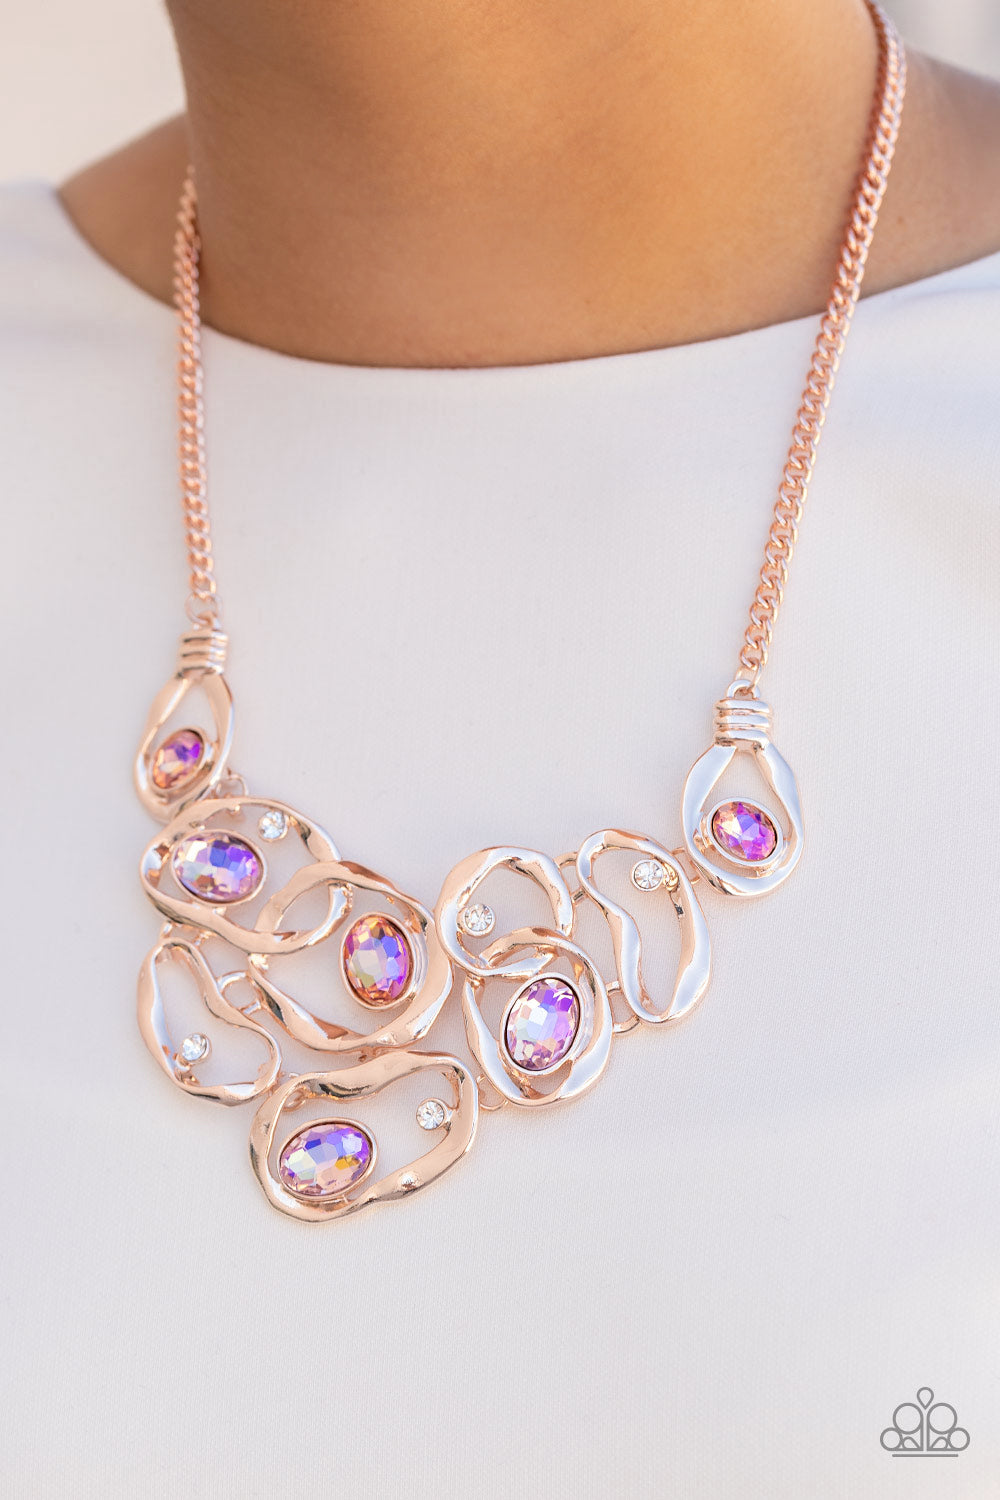 Paparazzi Warp Speed Rose Gold Short Necklace - Life Of The Party Exclusive July 2022 - P2ST-GDRS-134XX